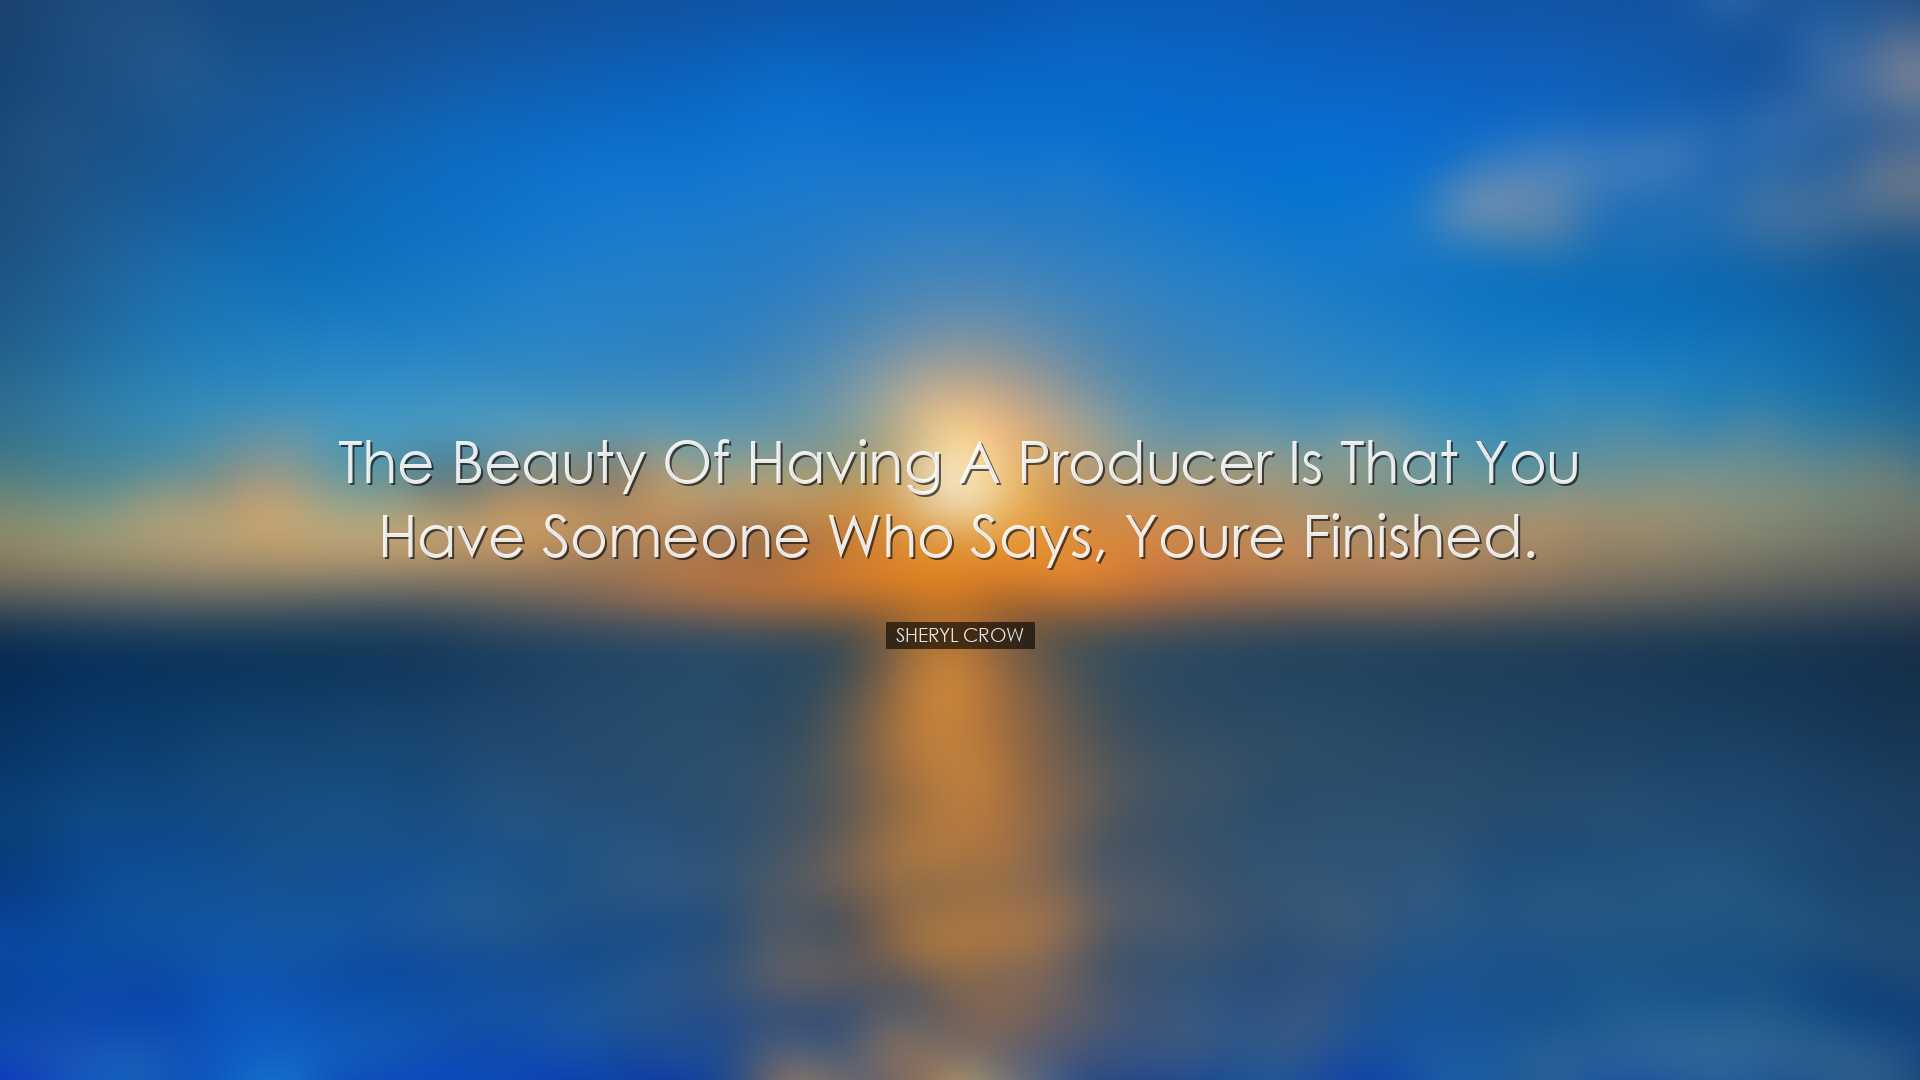 The beauty of having a producer is that you have someone who says,